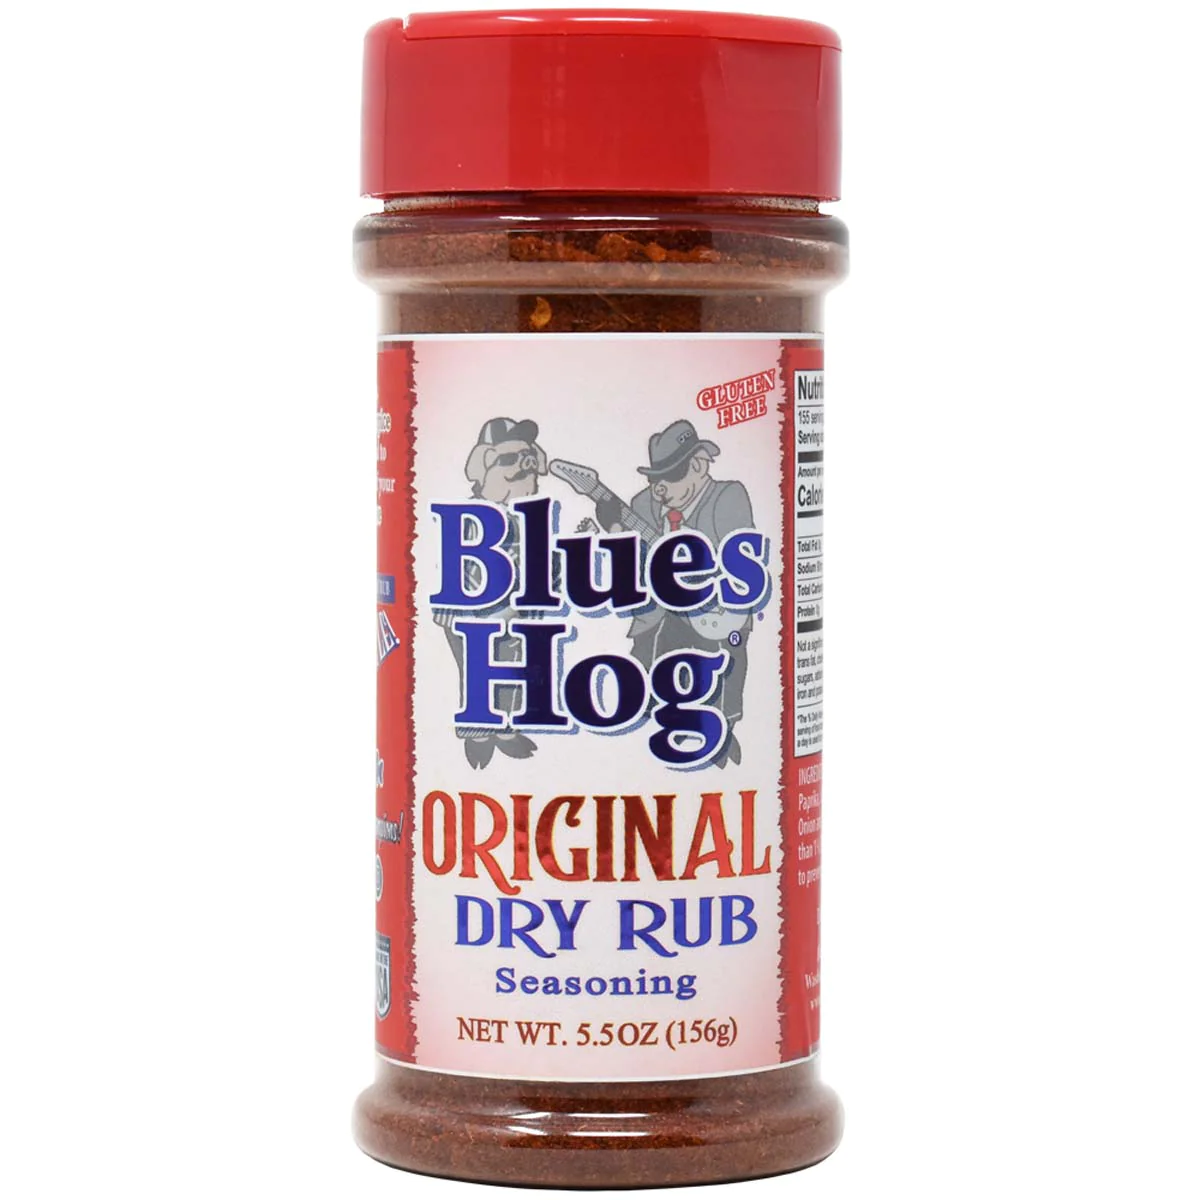 The front of a jar of Blues Hog Original Dry Rub Seasoning with a red lid. The label features the Blues Hog logo with two cartoon pigs dressed as musicians. The label reads 'Blues Hog Original Dry Rub Seasoning' and indicates the net weight of 5.5 ounces (156 grams). The label also mentions that the seasoning is gluten-free.